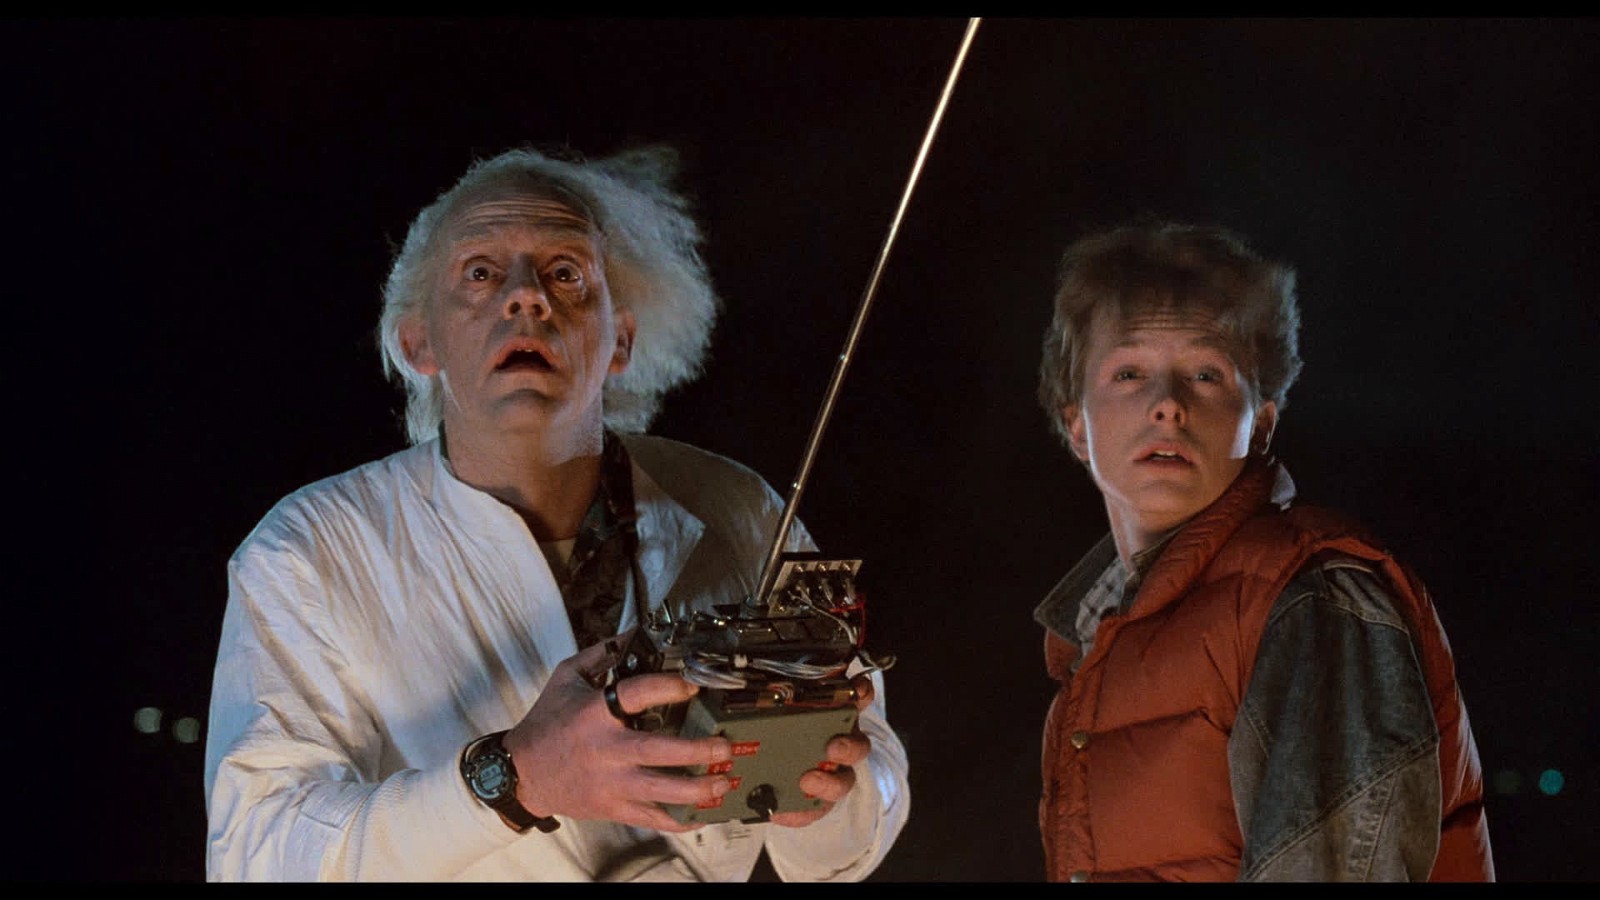 Michael J. Fox's Back to the Future is a seminal film for Ryan Reynolds